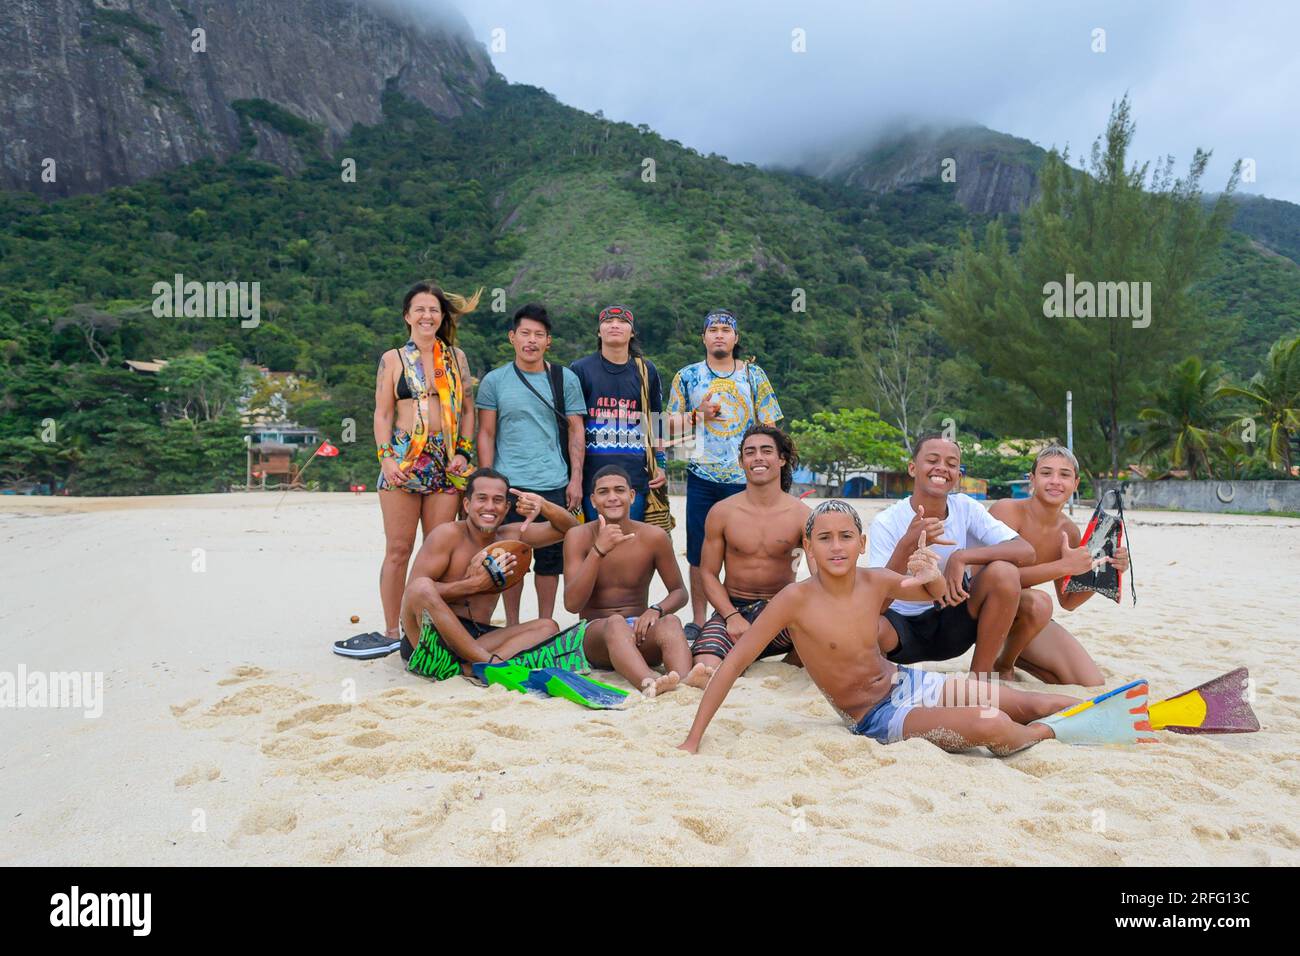 Niteroi, Brazil, Candid portrait of a group of young Brazilian people enjoying the beach. Stock Photo